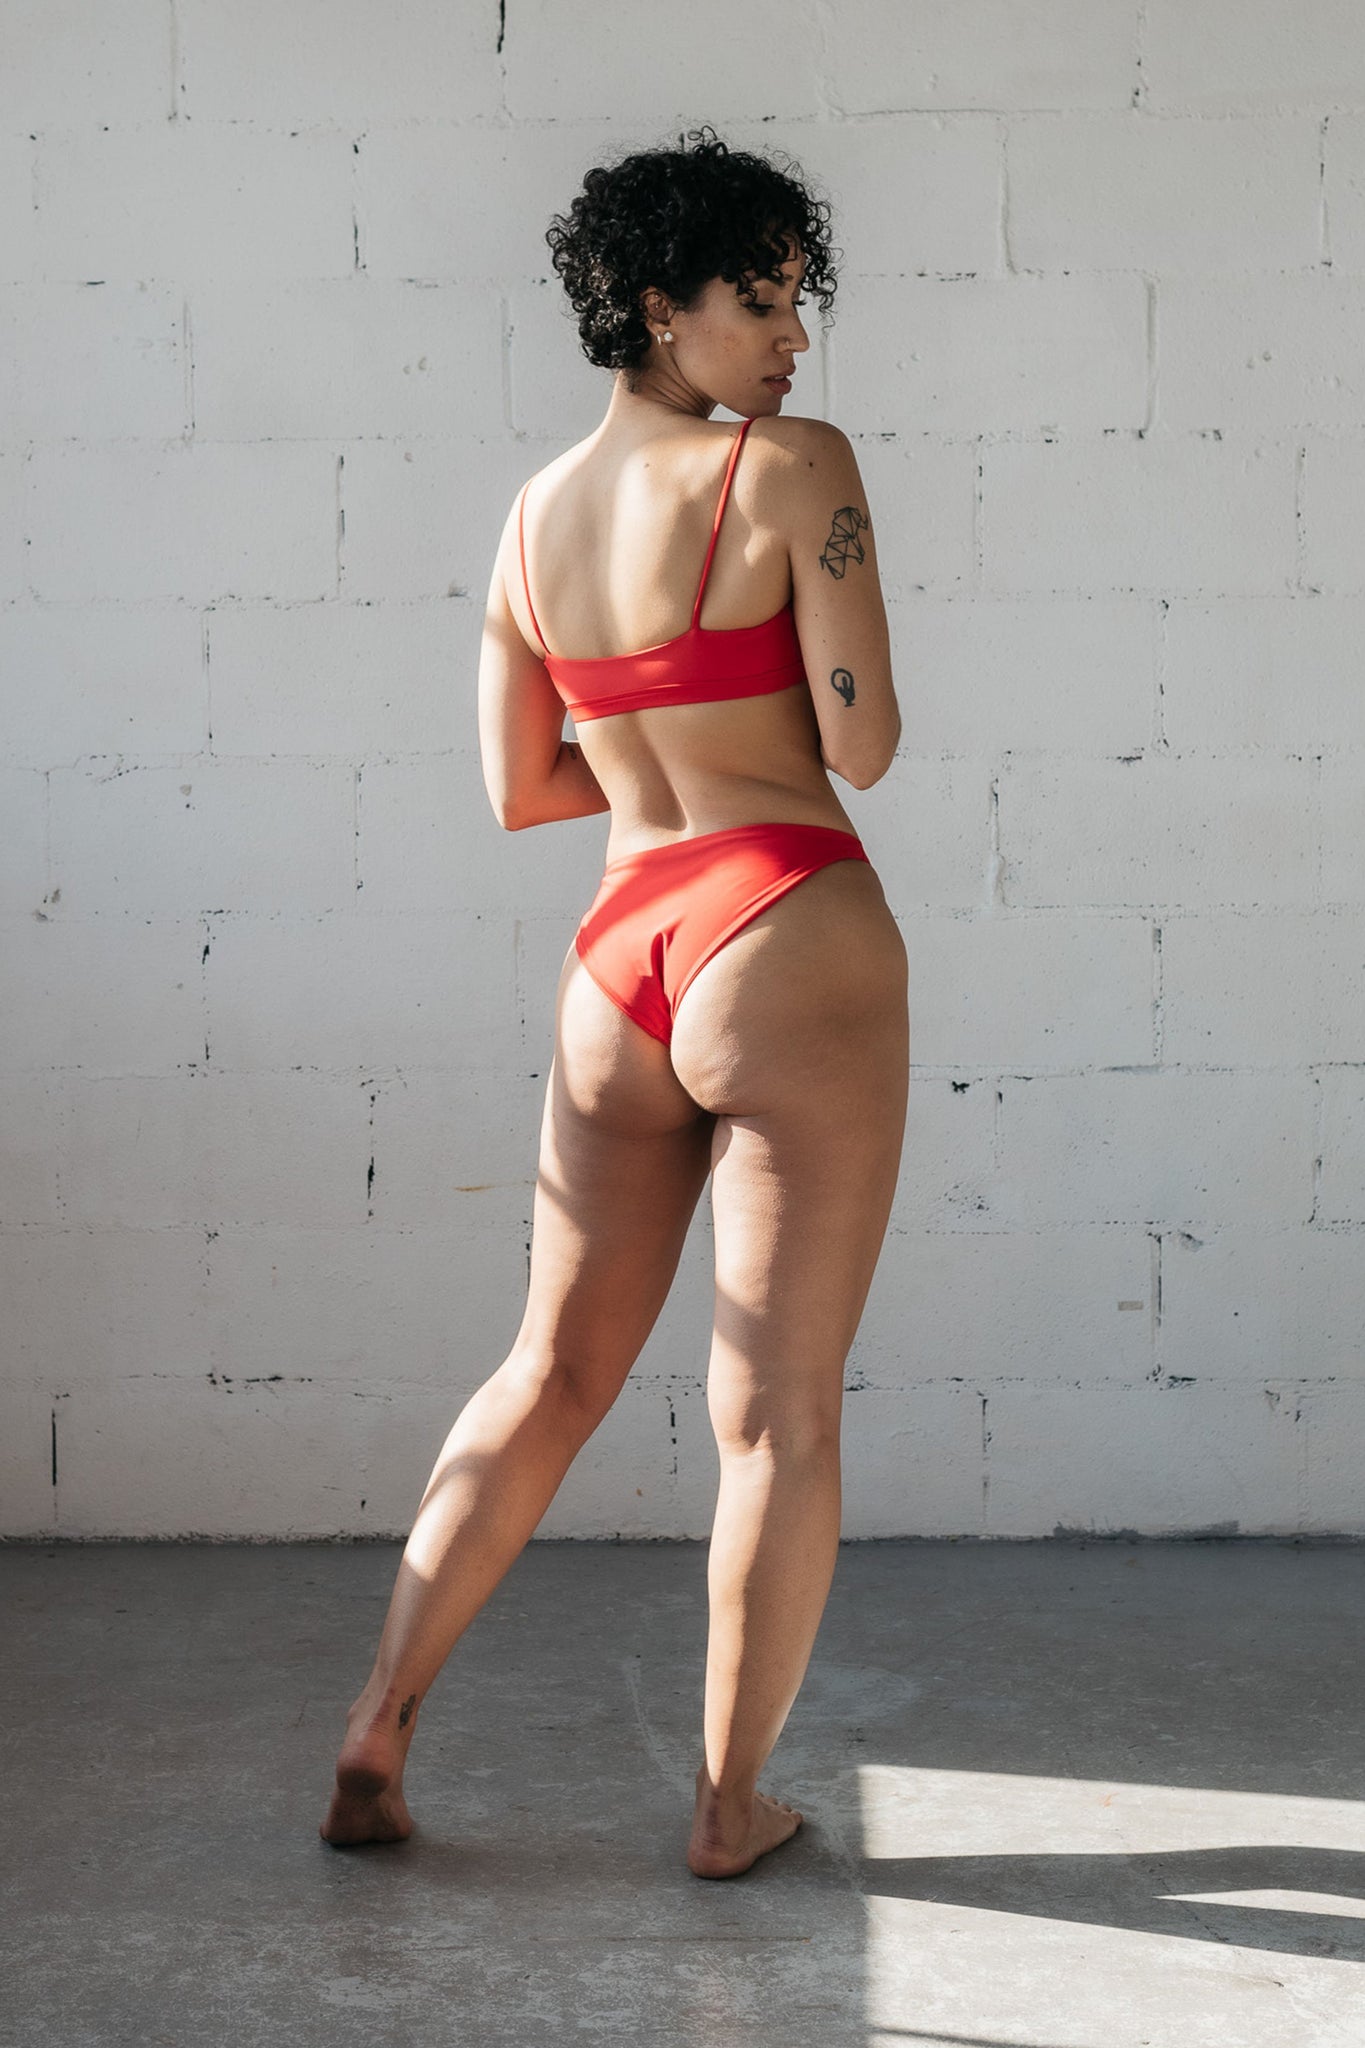 A woman standing and looking over her shoulder wearing high cut red bikini bottoms and a red bikini top with spaghetti straps.